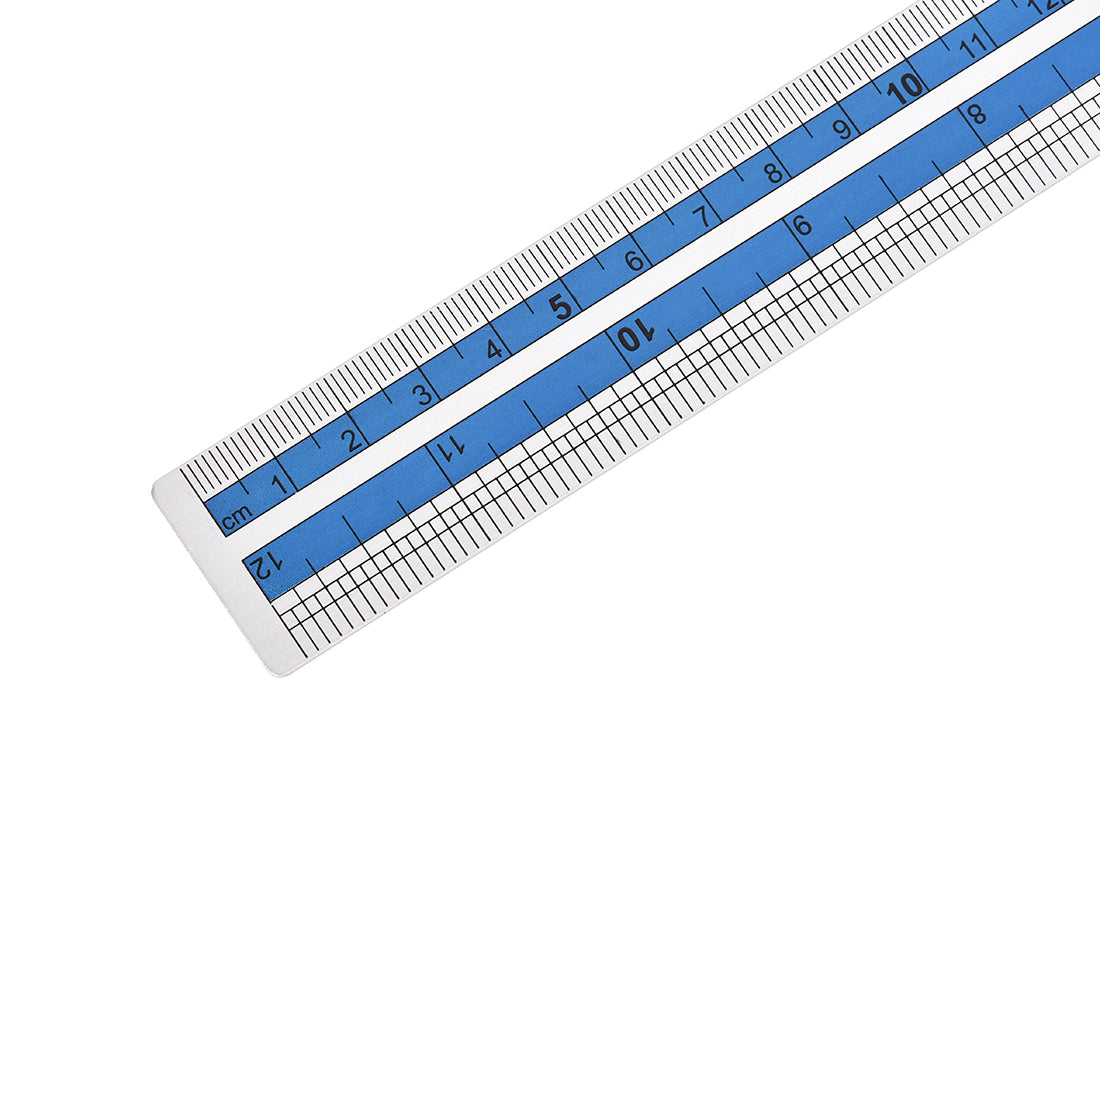 Uxcell Uxcell Aluminum Ruler Set 300mm 12 Inch Straight Ruler Measuring Tool Silver Blue